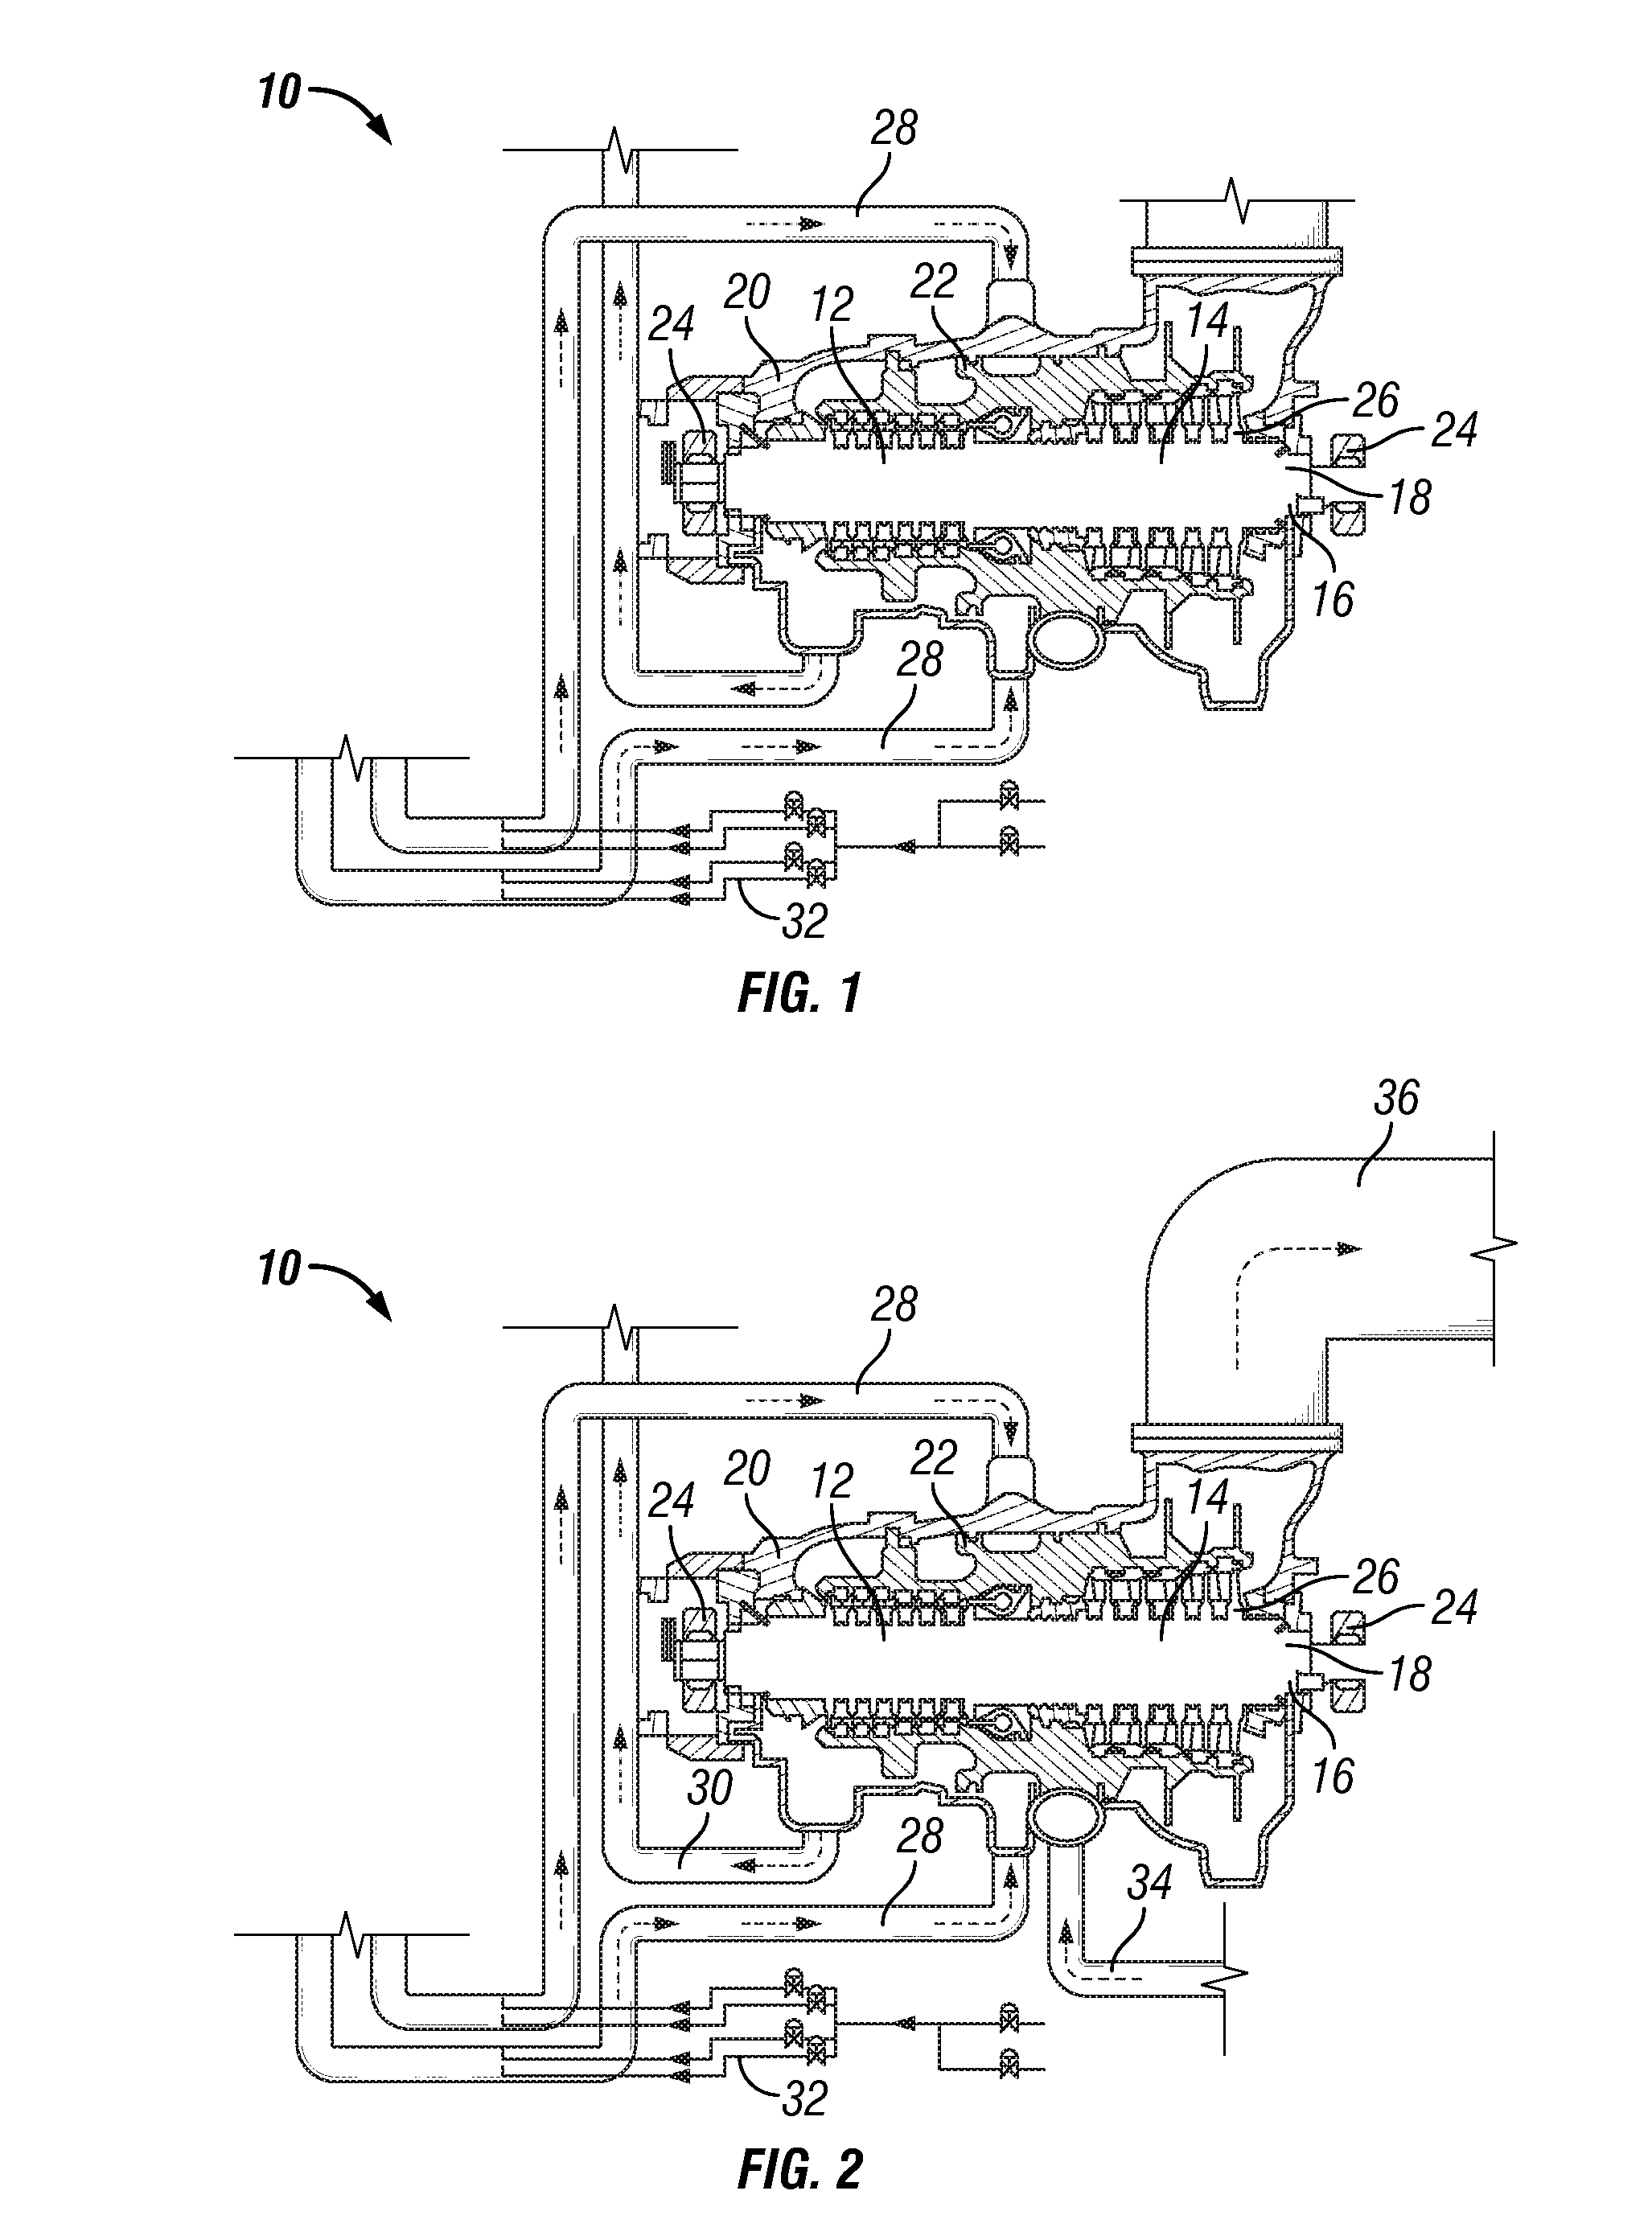 System and method of cooling turbines